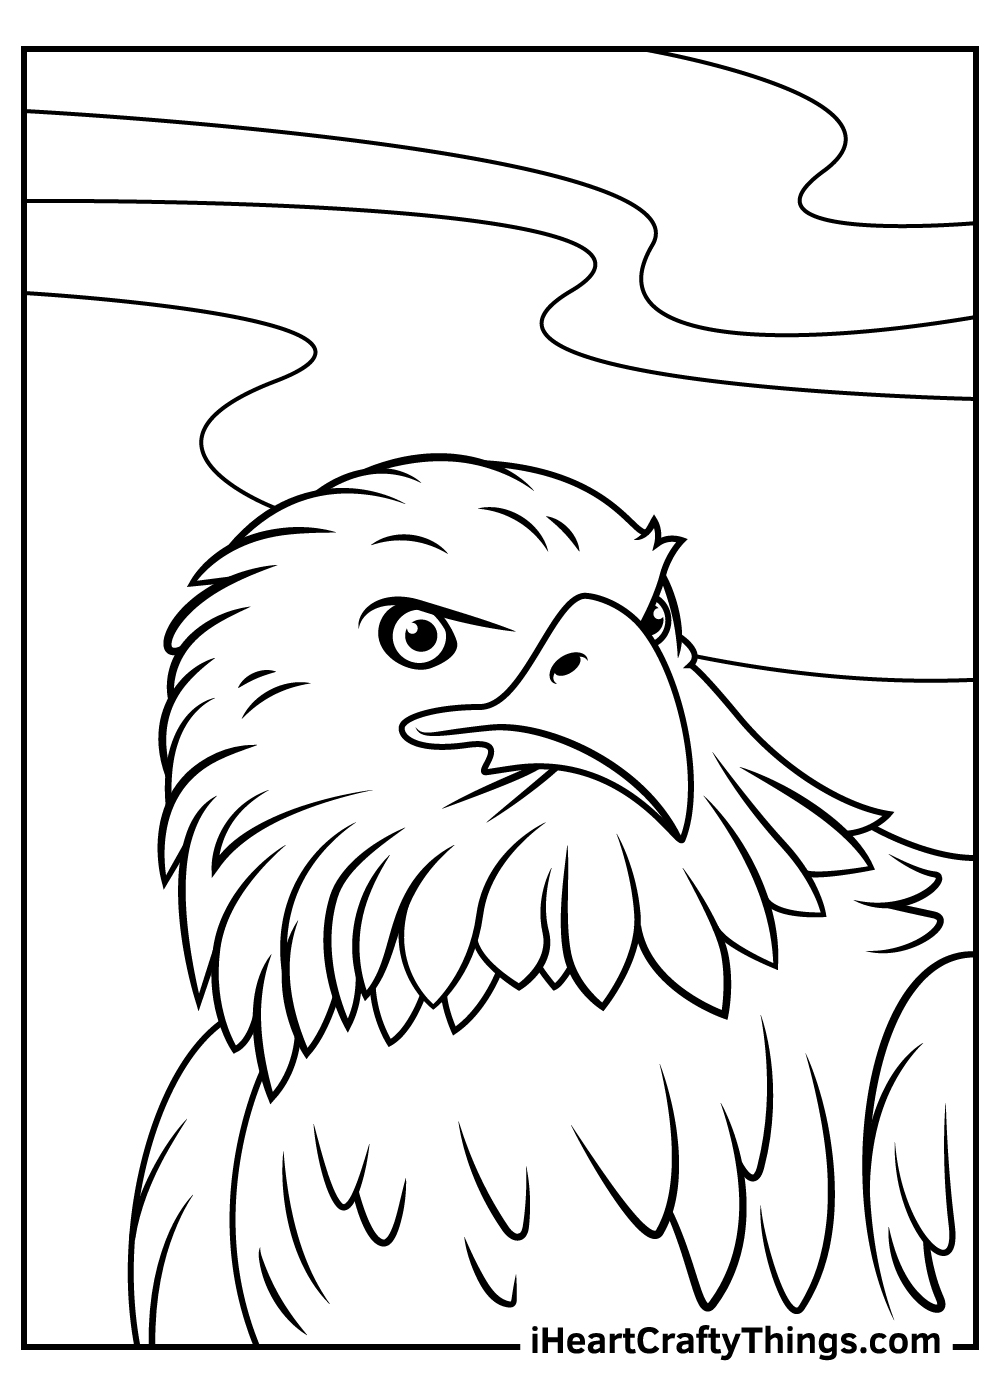 Bald eagle coloring pages updated